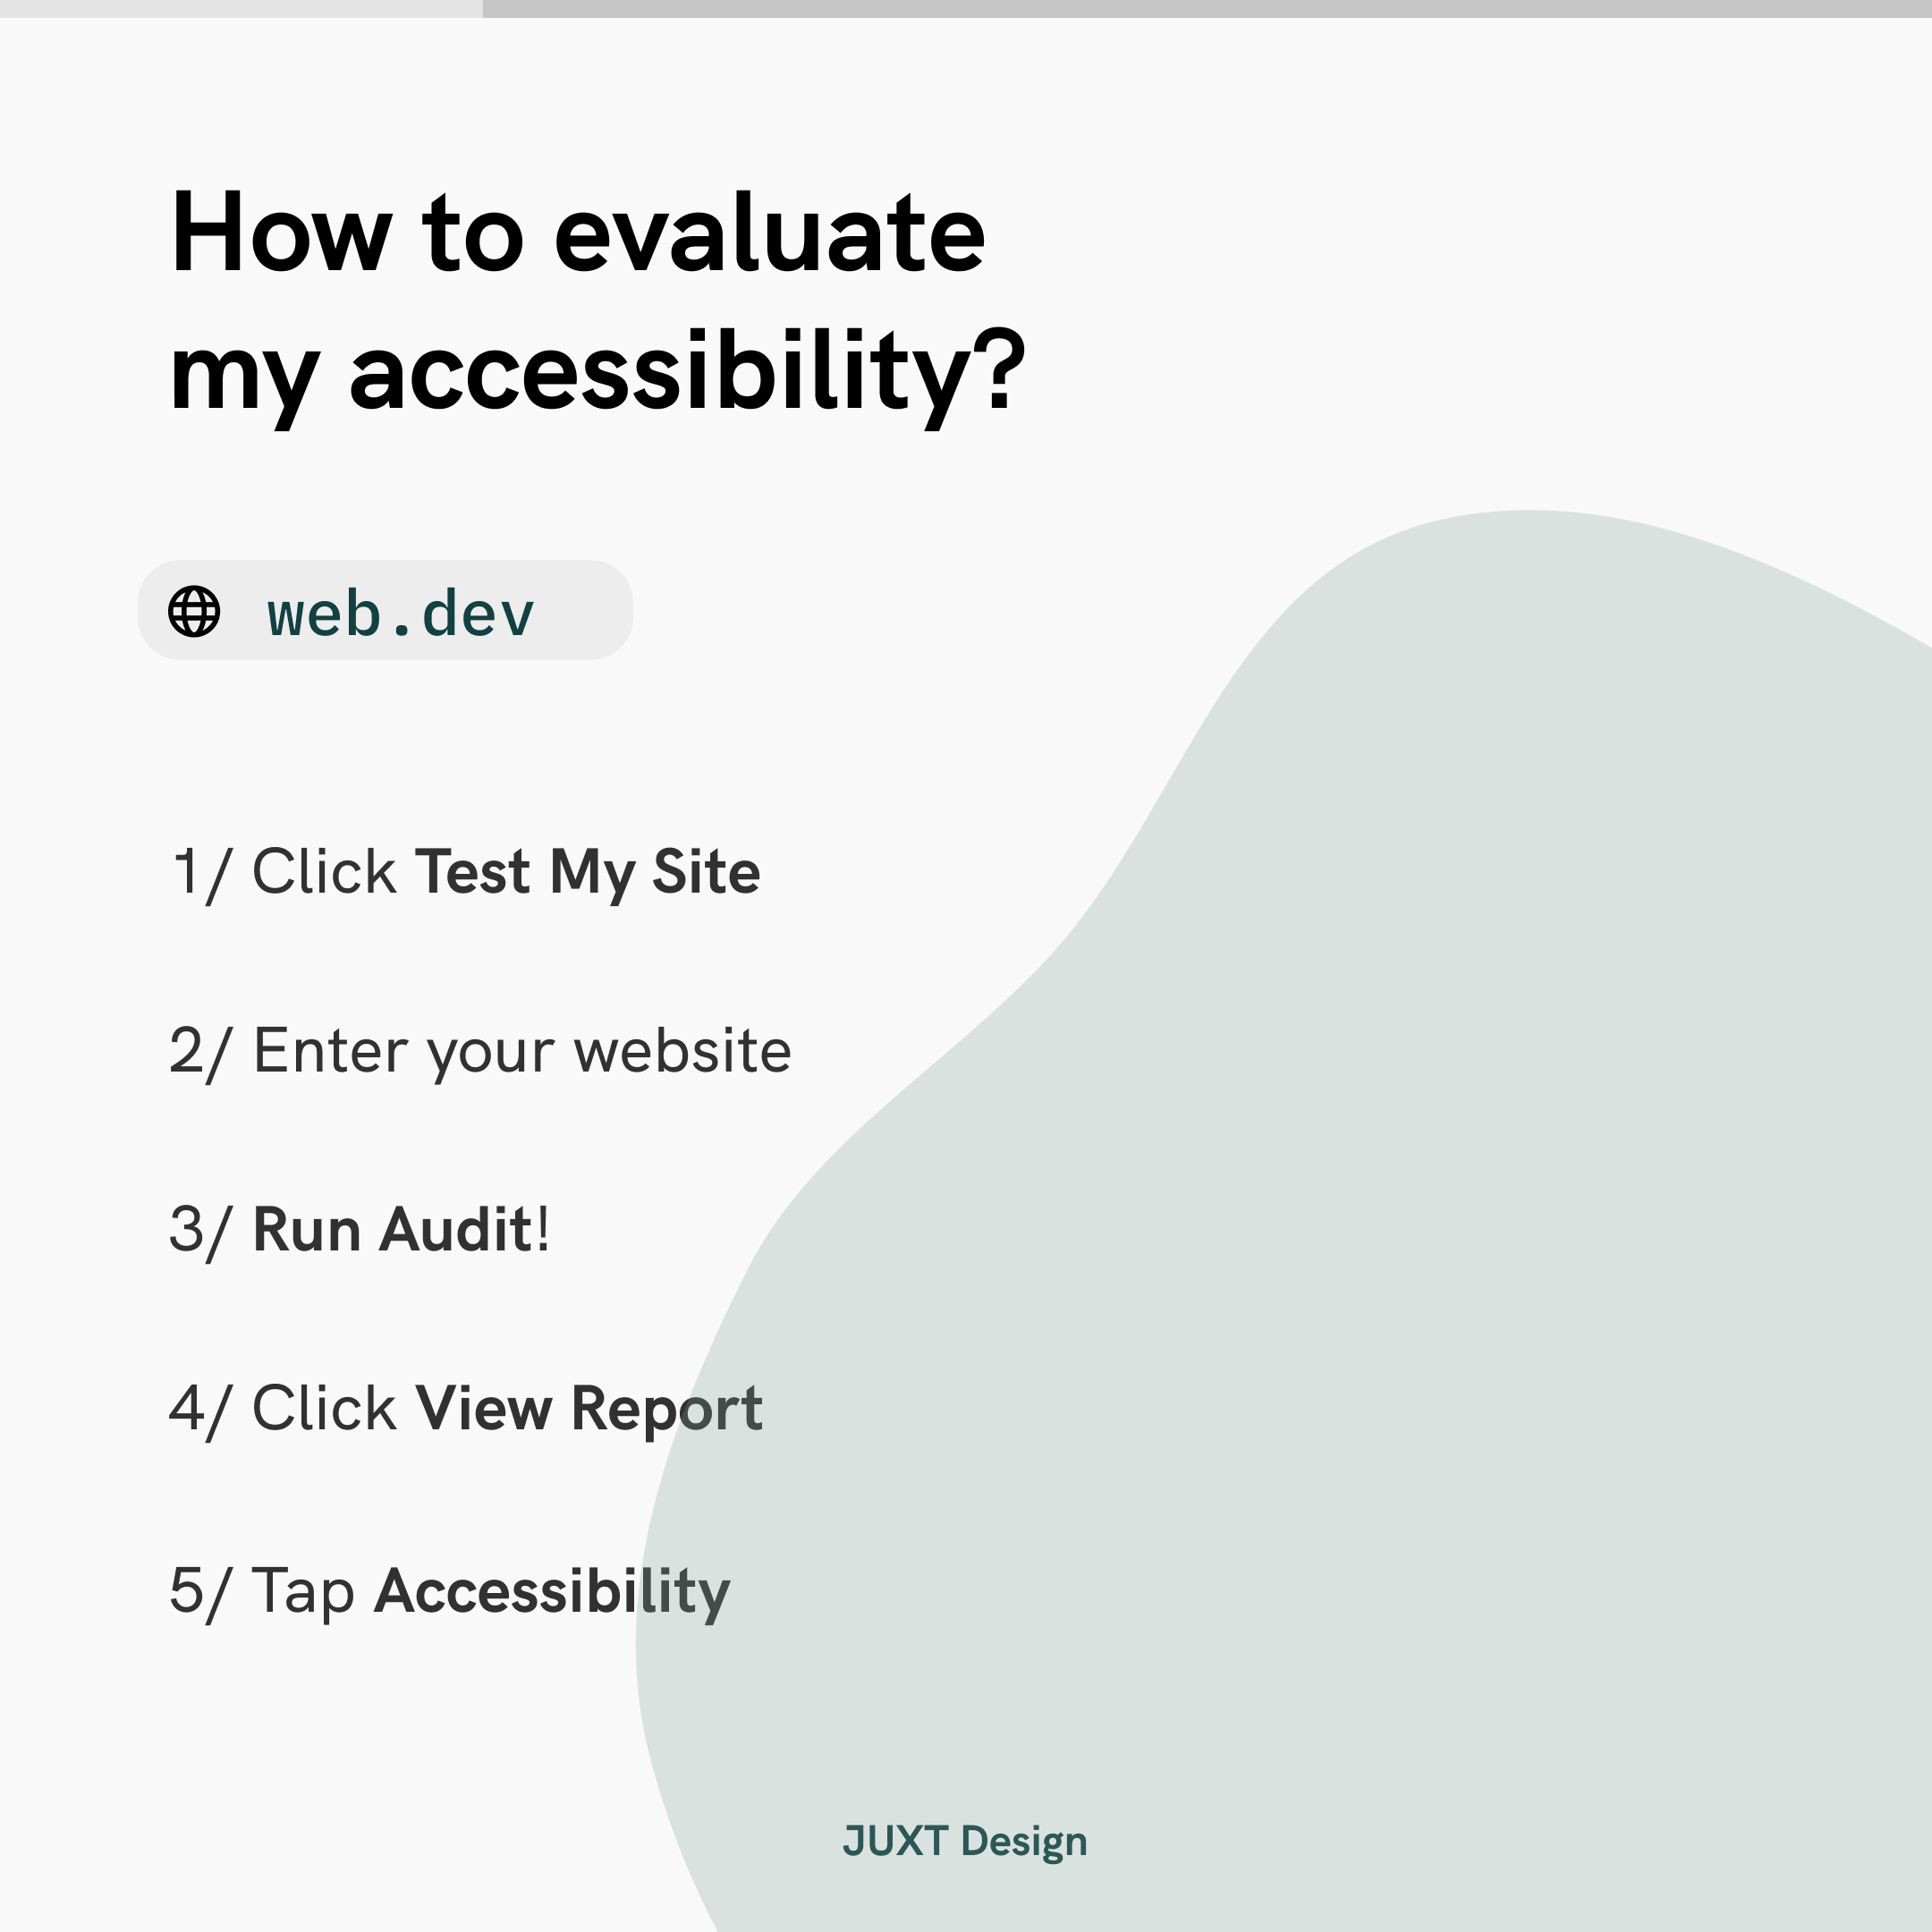 Evaluate my accessibility with web.dev